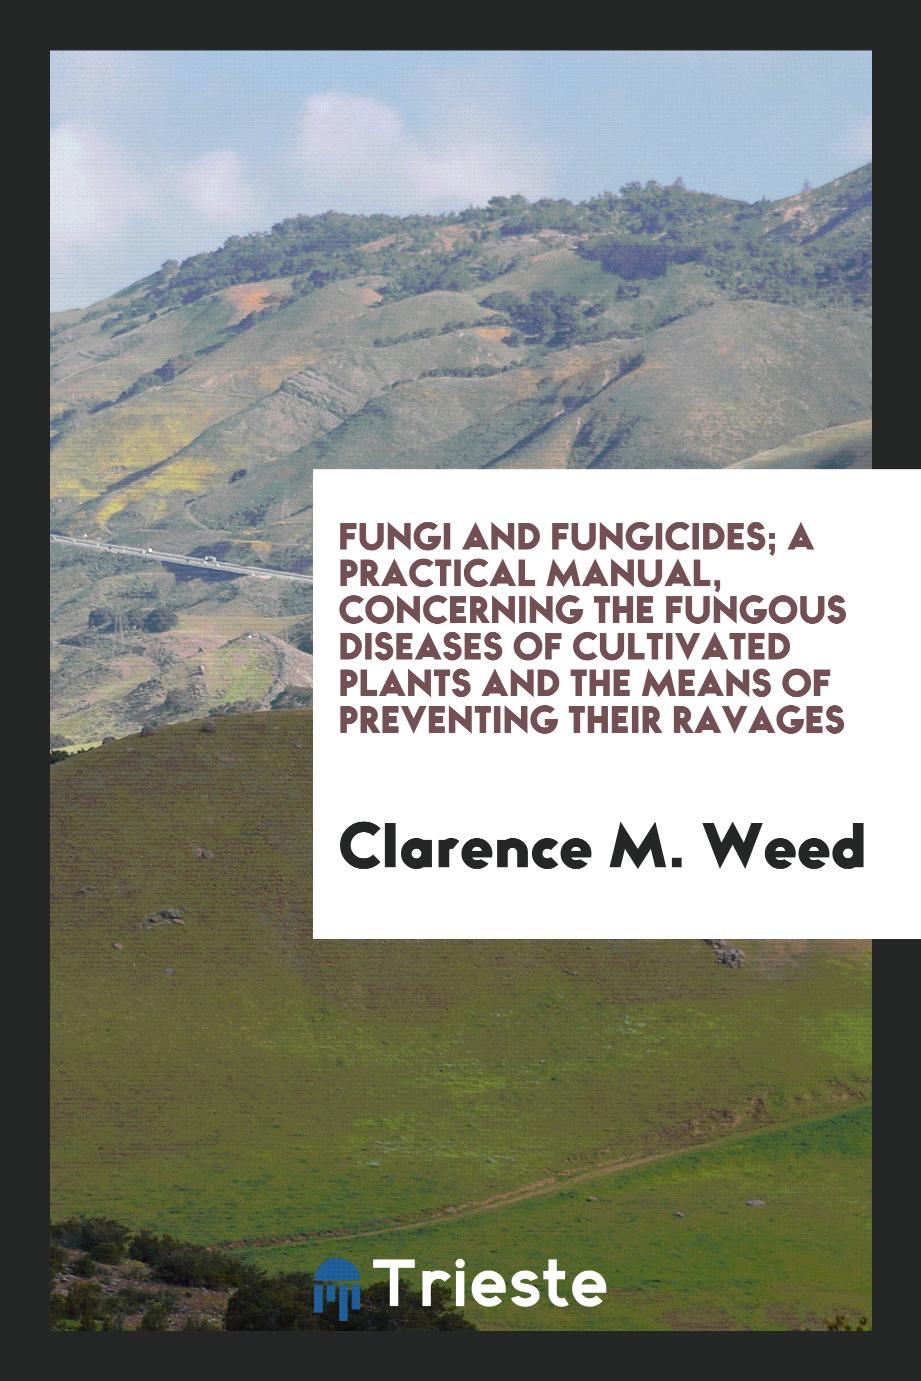 Fungi and fungicides; a practical manual, concerning the fungous diseases of cultivated plants and the means of preventing their ravages